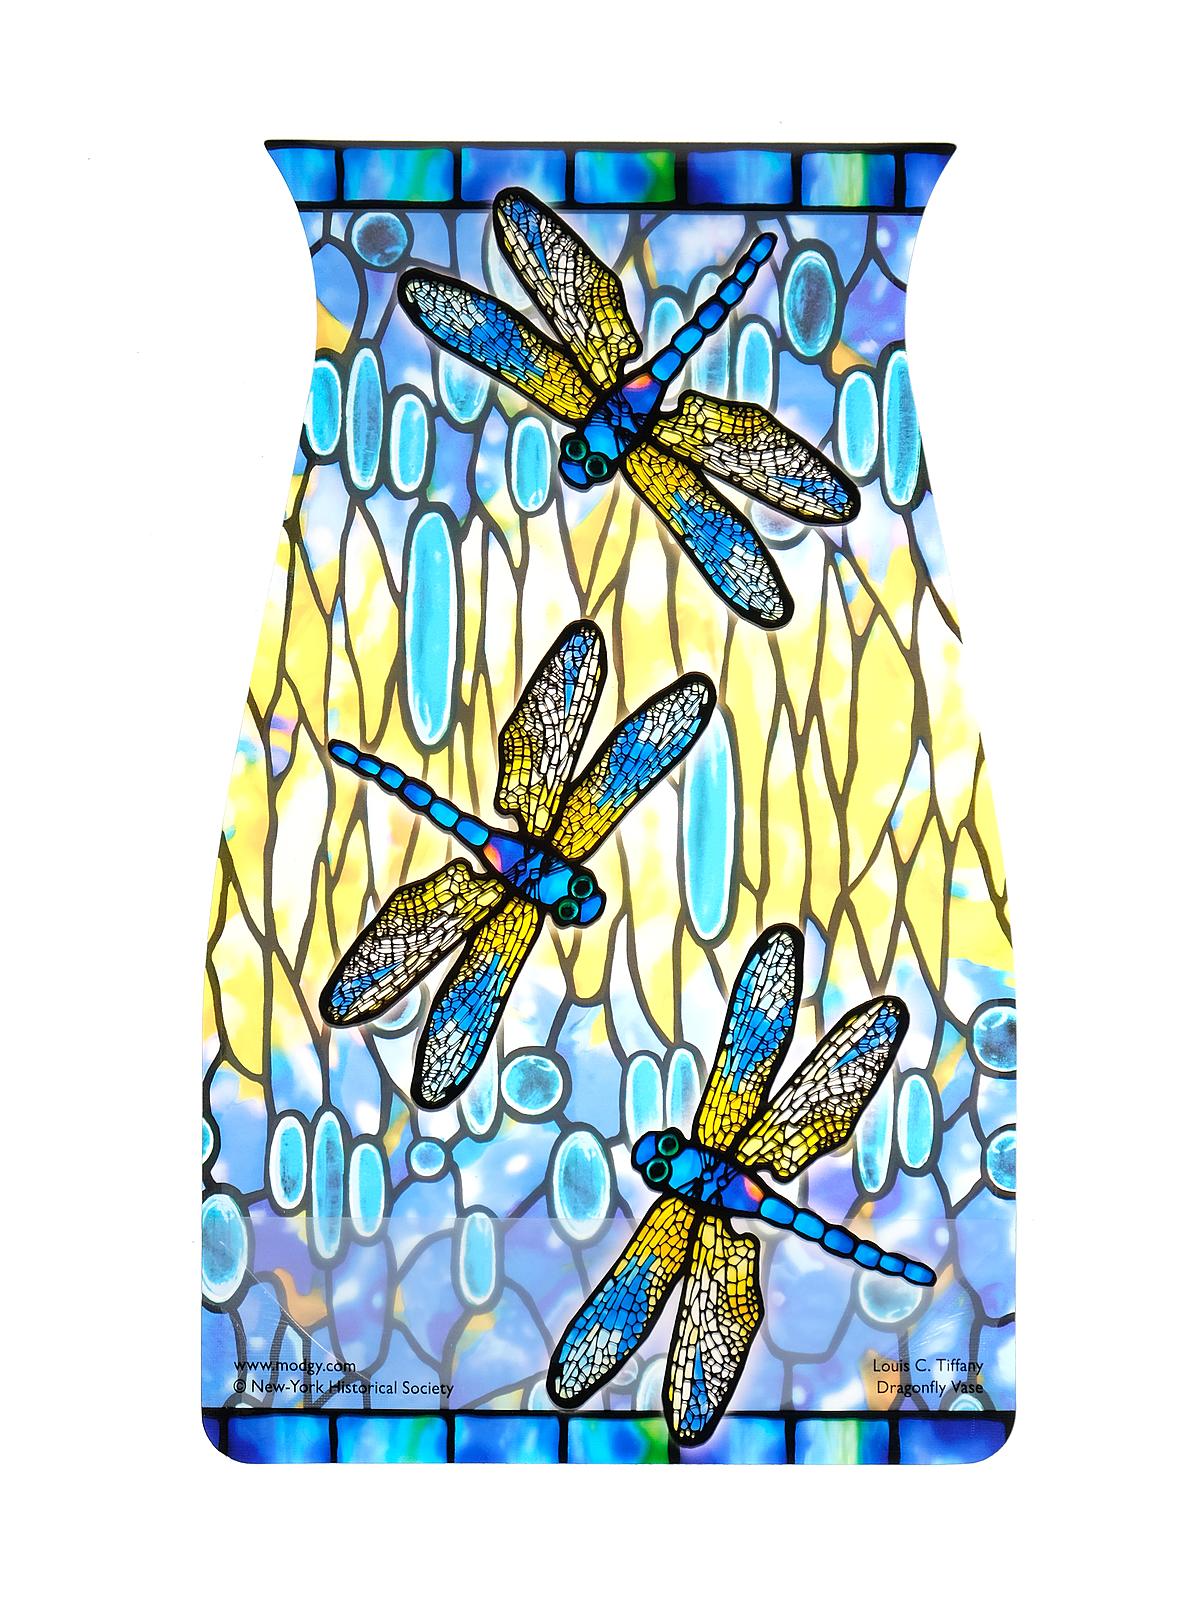 Expandable Vase 10 1 4 In. H X 6 1 4 In. W Tiffany Dragonfly